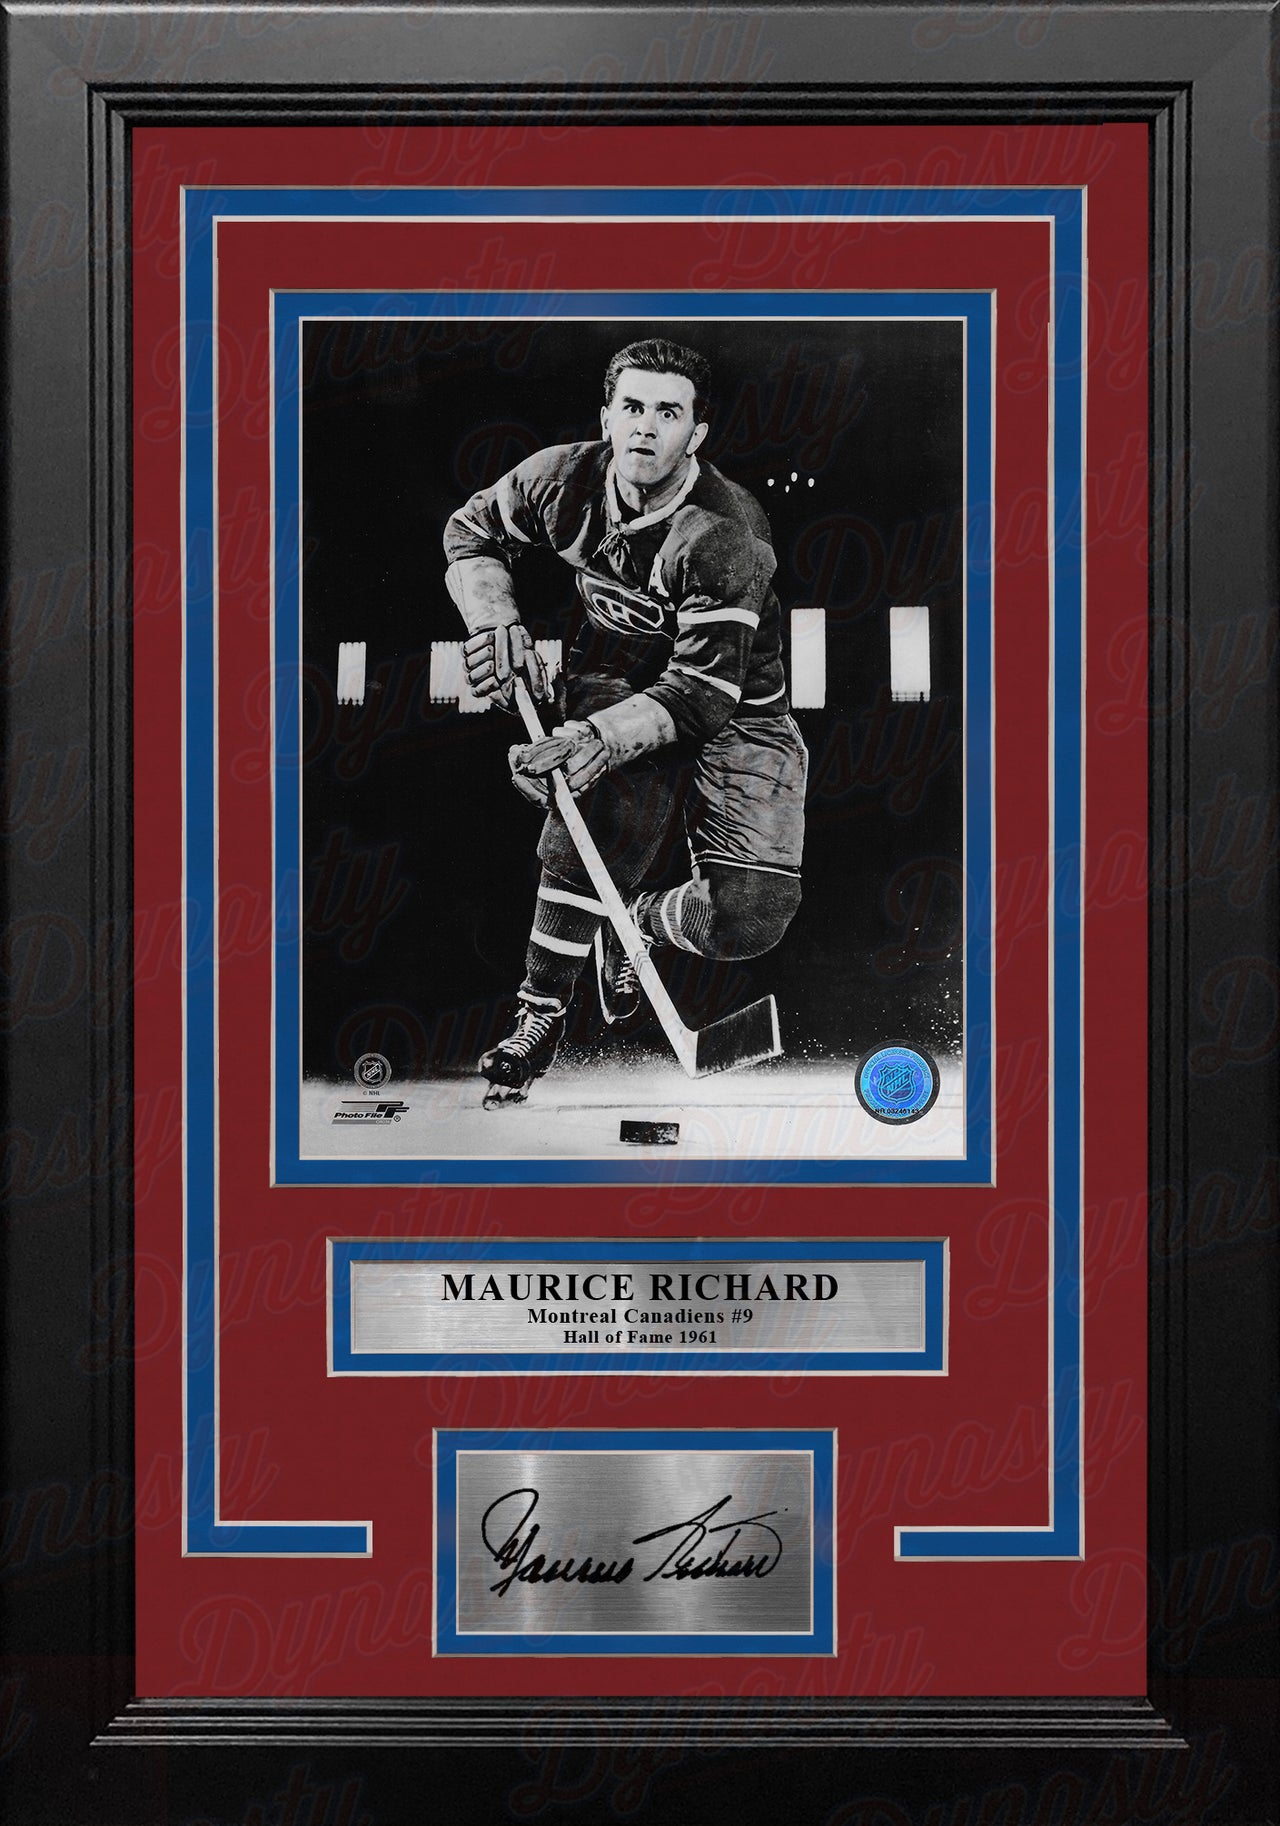 Maurice Richard Montreal Canadiens 8" x 10" Framed Classic Hockey Photo with Engraved Autograph - Dynasty Sports & Framing 